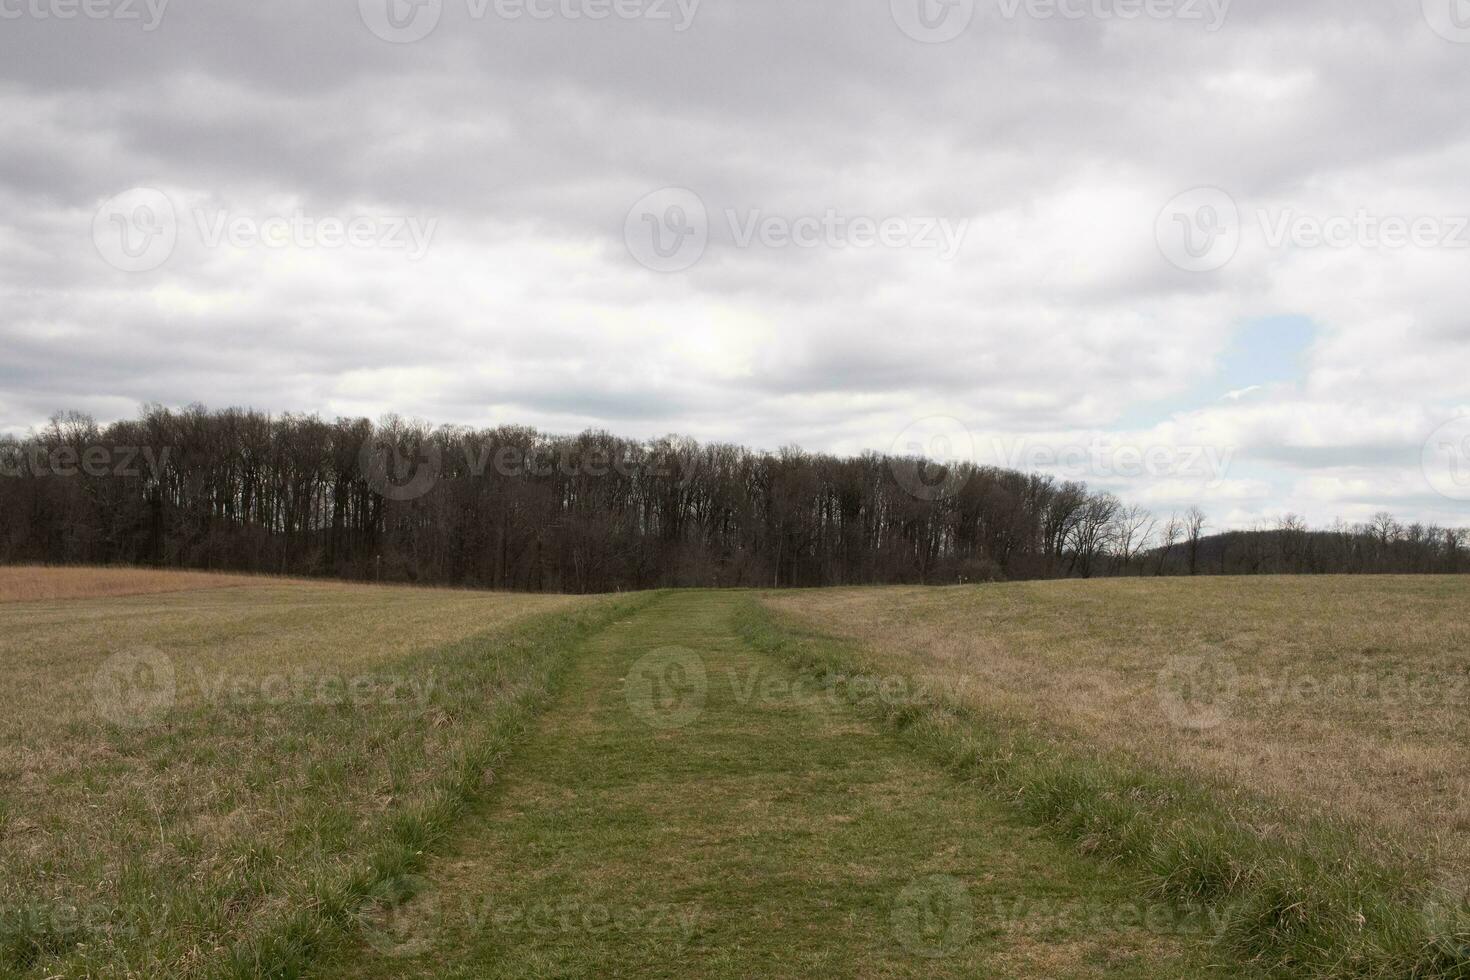 This beautiful walking path was cut through the field. The green, well-manicured lawn standing out among all the brown tall grass. This trail heads through a nature preserved around a wooded area. photo